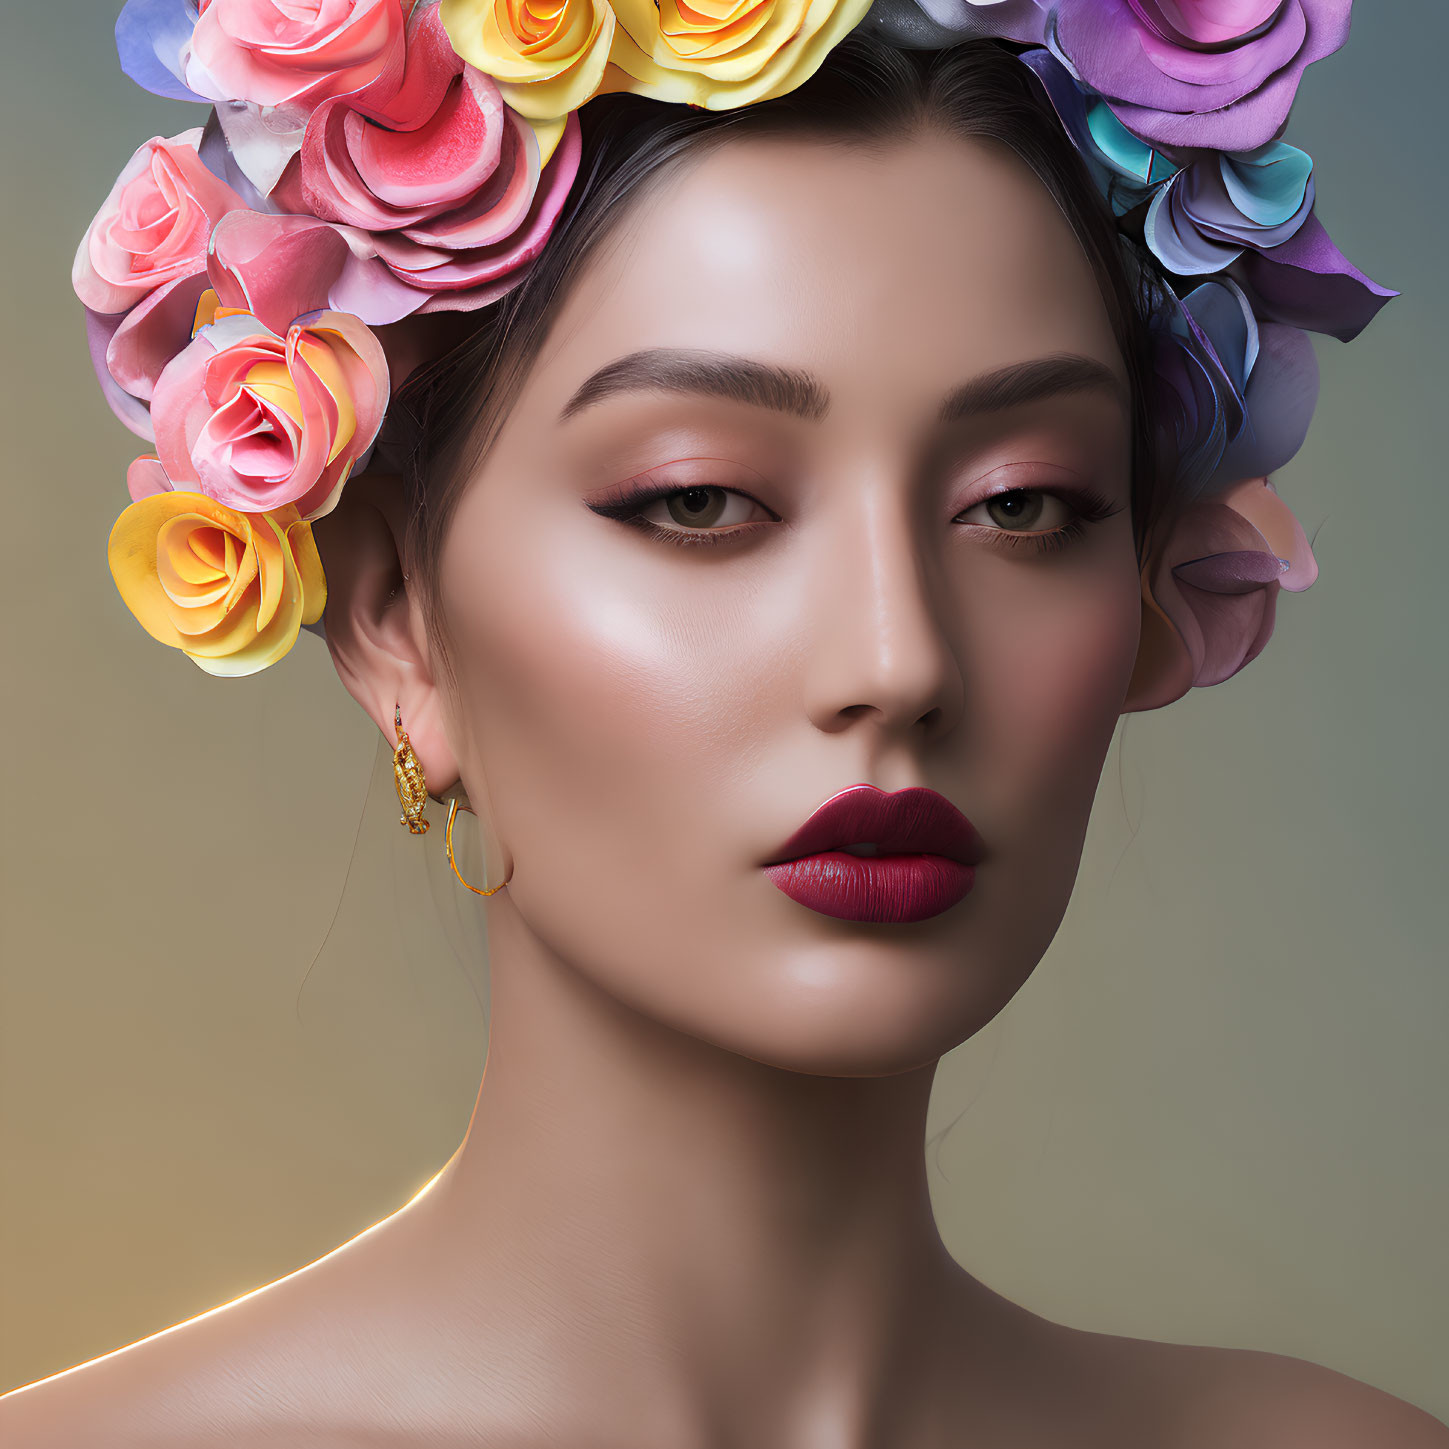 Woman with Floral Headpiece and Serene Expression on Neutral Background